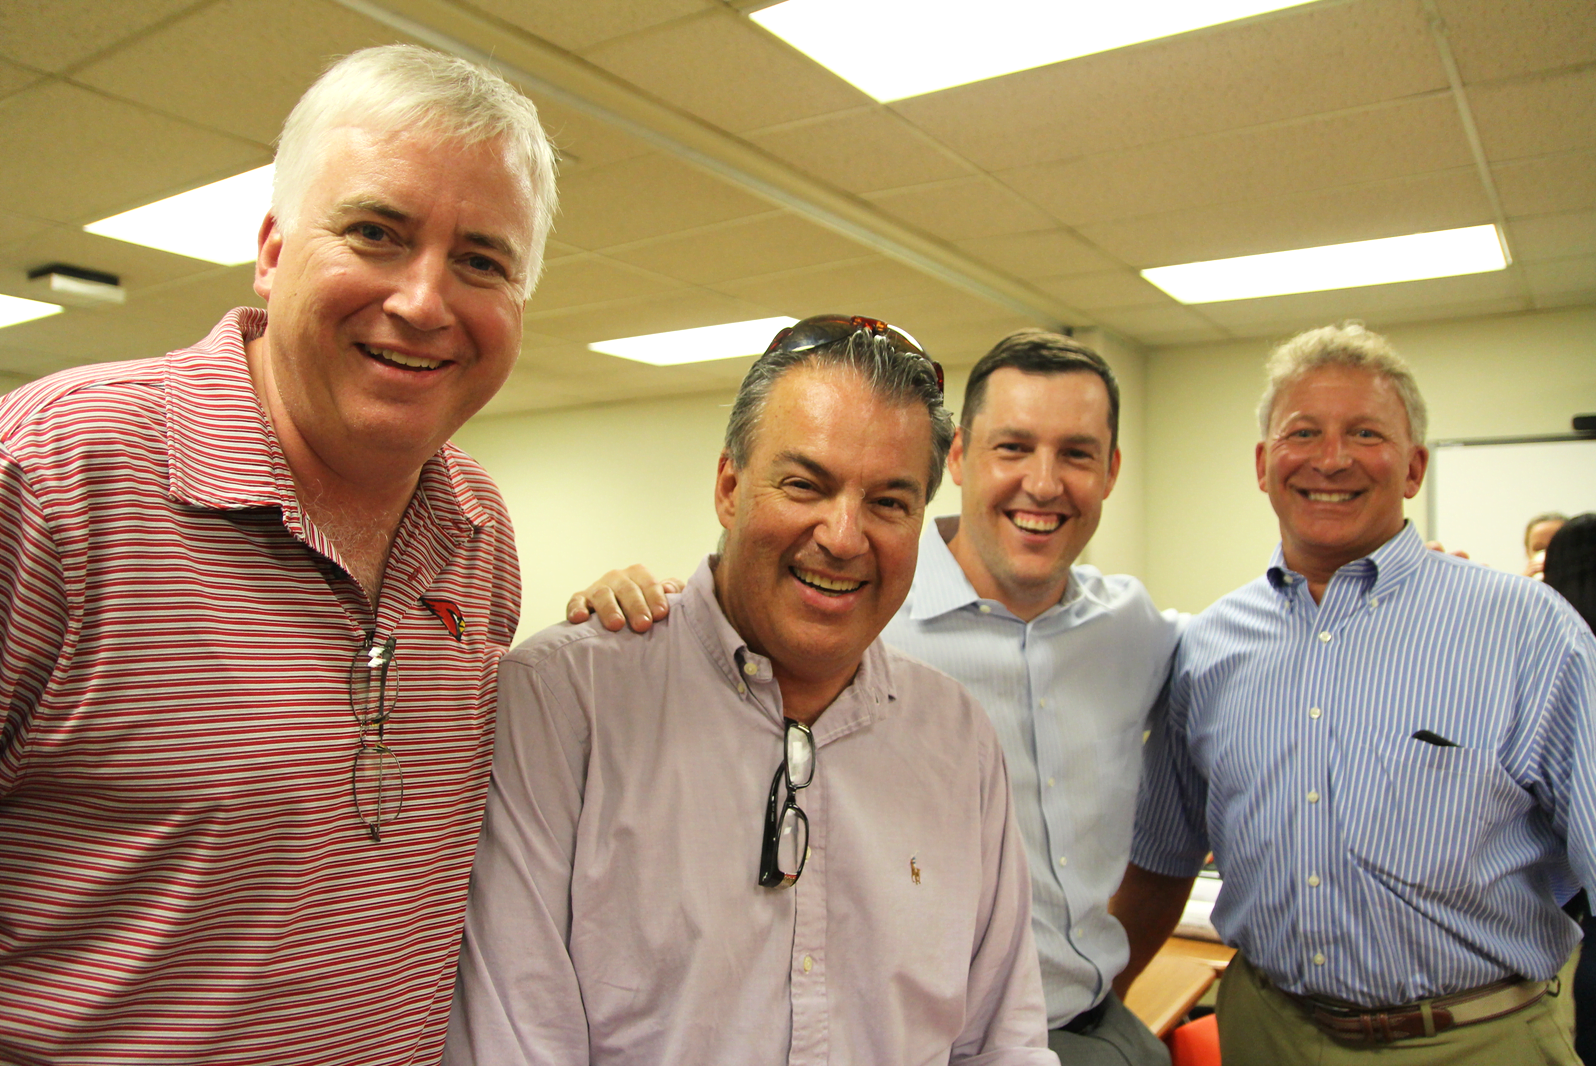 Members of the Greenwich Athletic Foundation Rich Fulton, Randy Caravella, Rob Burton and Rick Kral at the Board of Education meeting on July 25, 2019 Photo: Leslie Yager